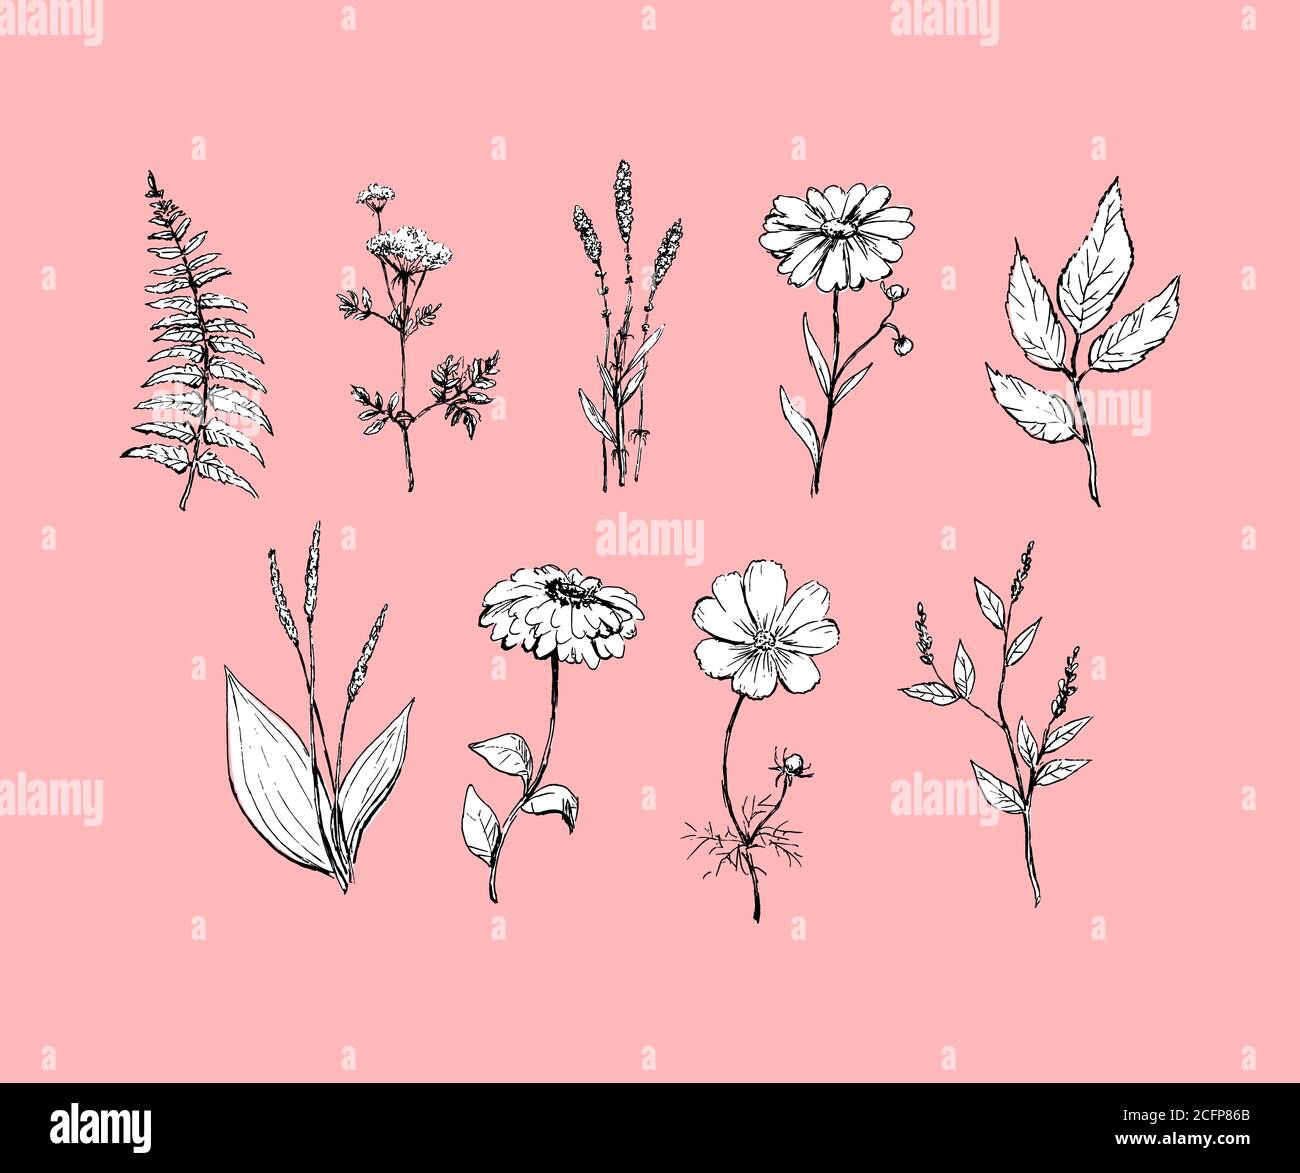 Botany. Set. Vintage flowers. Black and white illustration in the style of engravings. Stock Vector